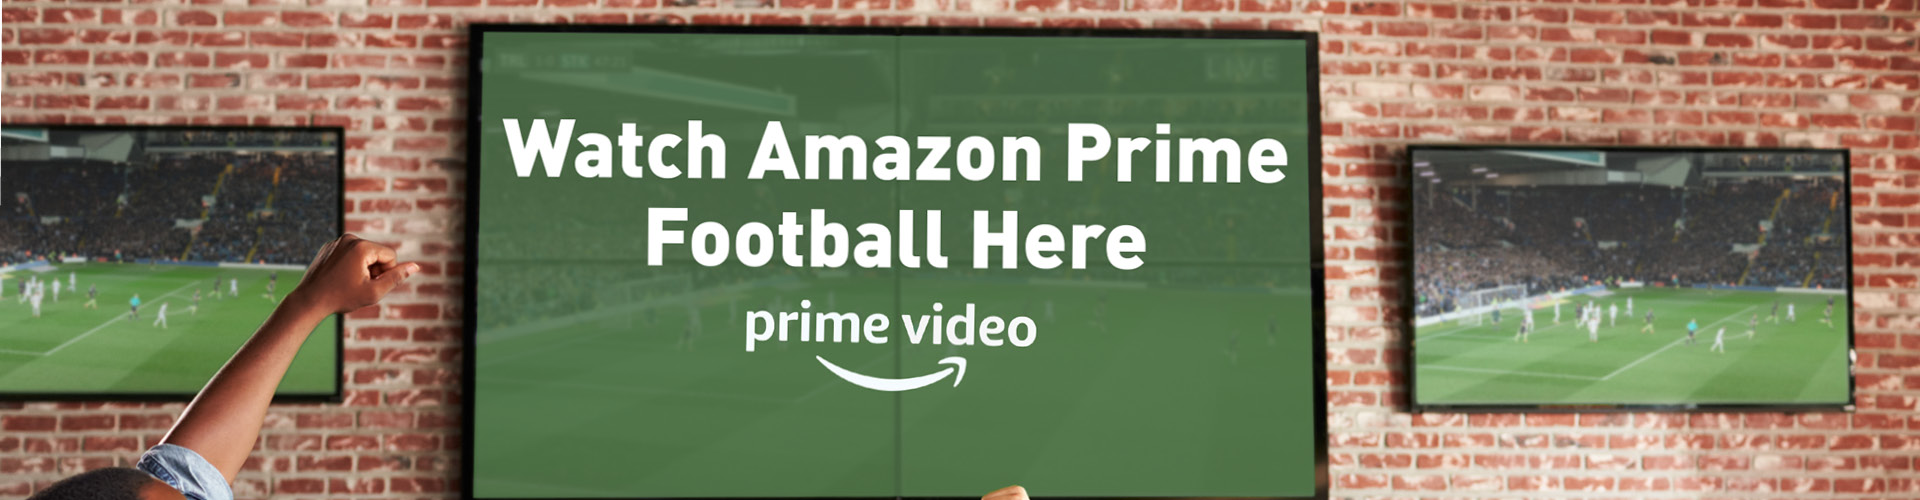 Watch Amazon Prime football at The Picture House in Leighton Buzzard